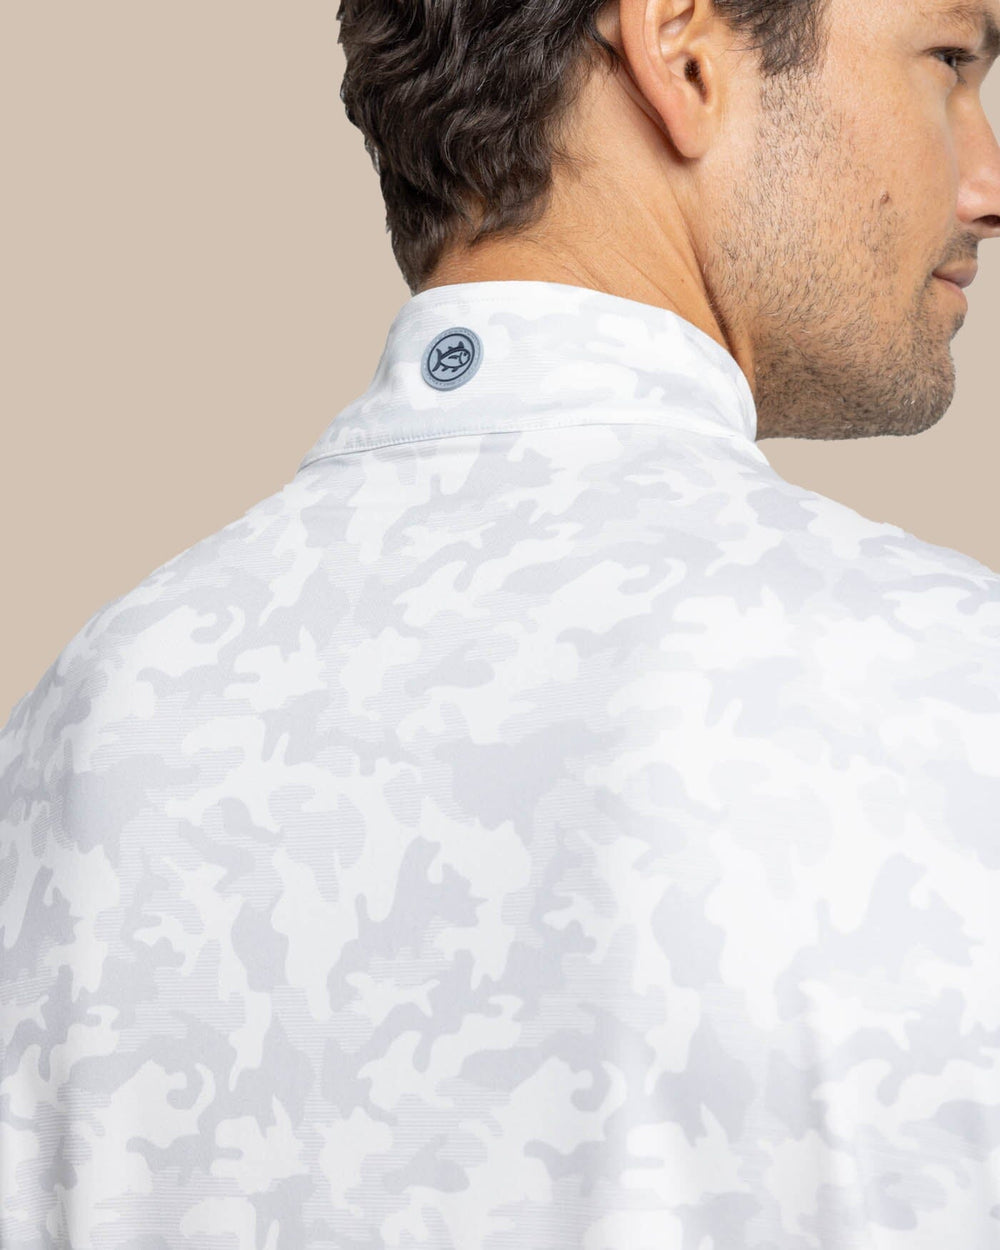 The detail view of the Southern Tide Island Camo Print Cruiser Quarter Zip by Southern Tide - Classic White